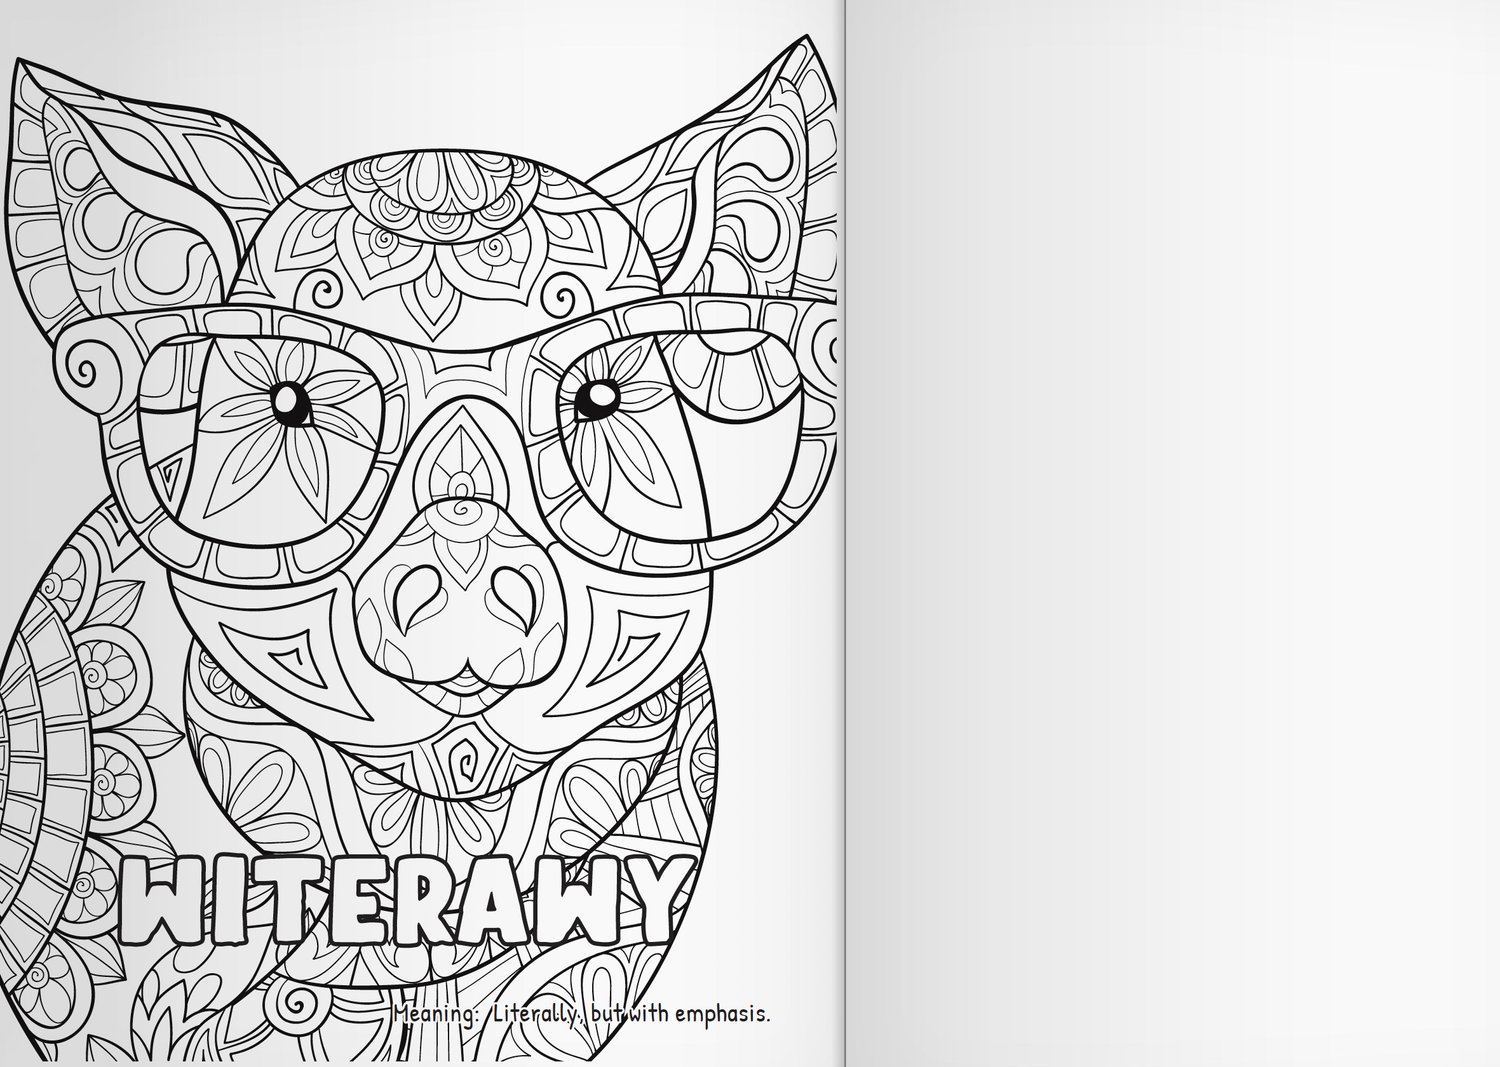 Coloring Books for Adults - Set III – dabblesack